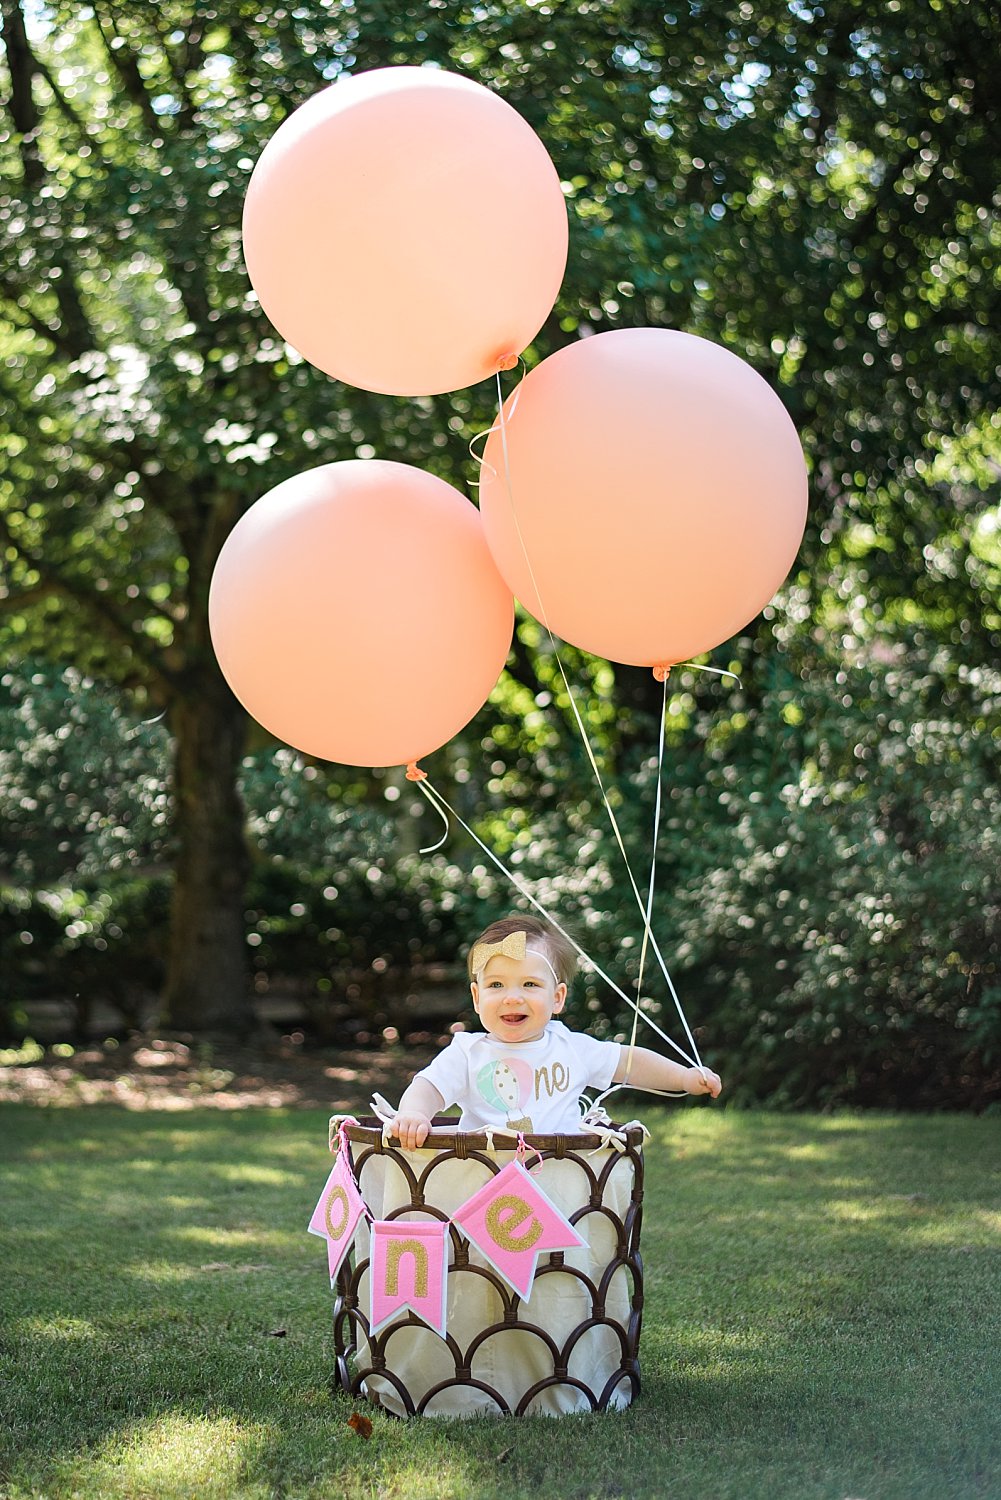 Baby girl in basket with balloons